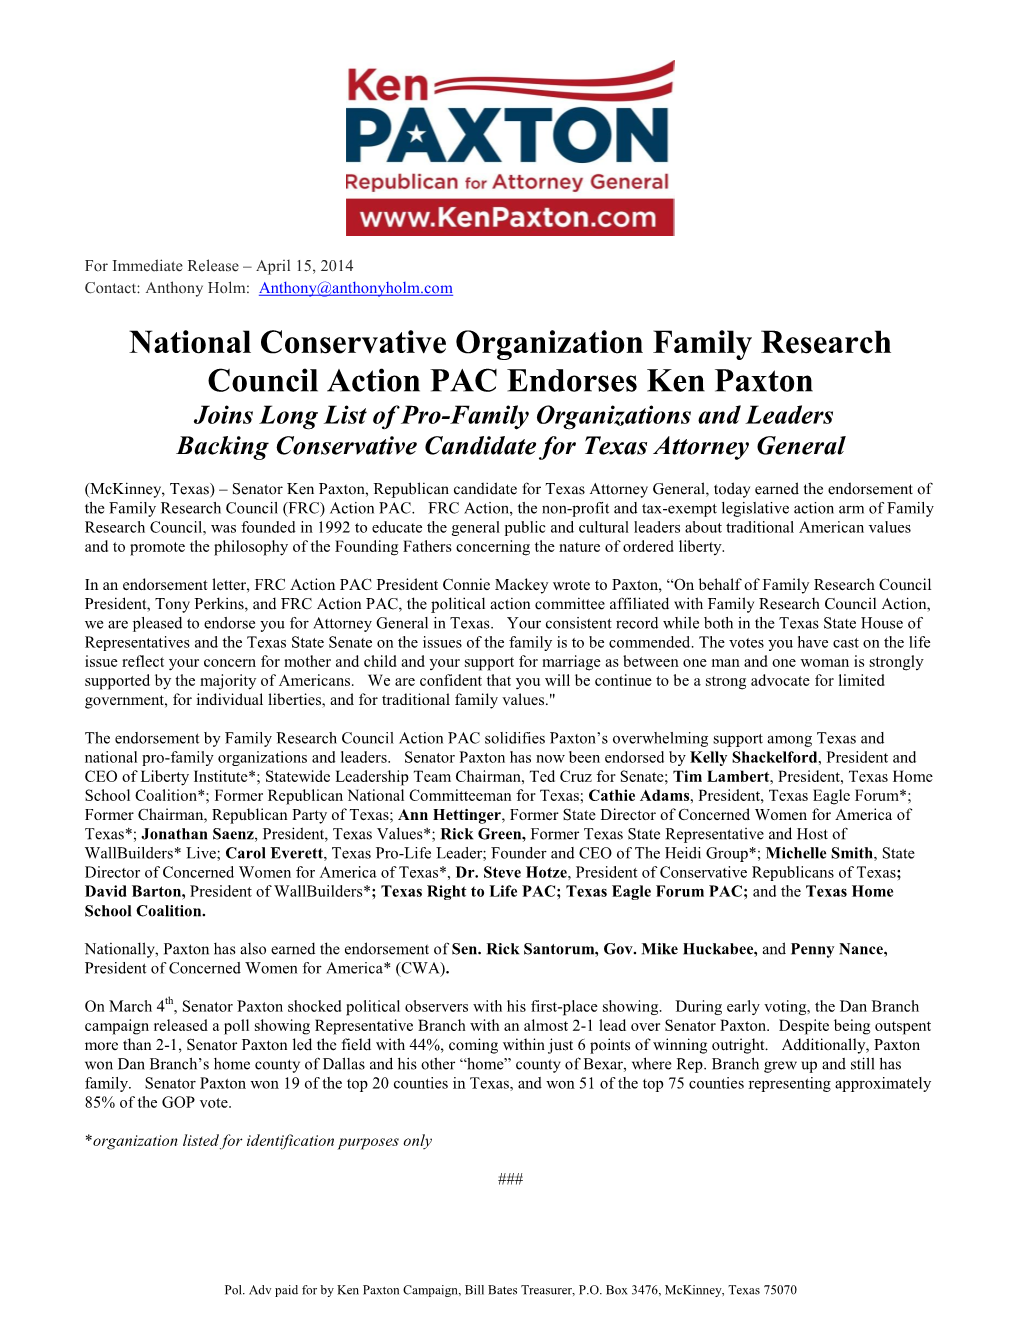 National Conservative Organization Family Research Council Action